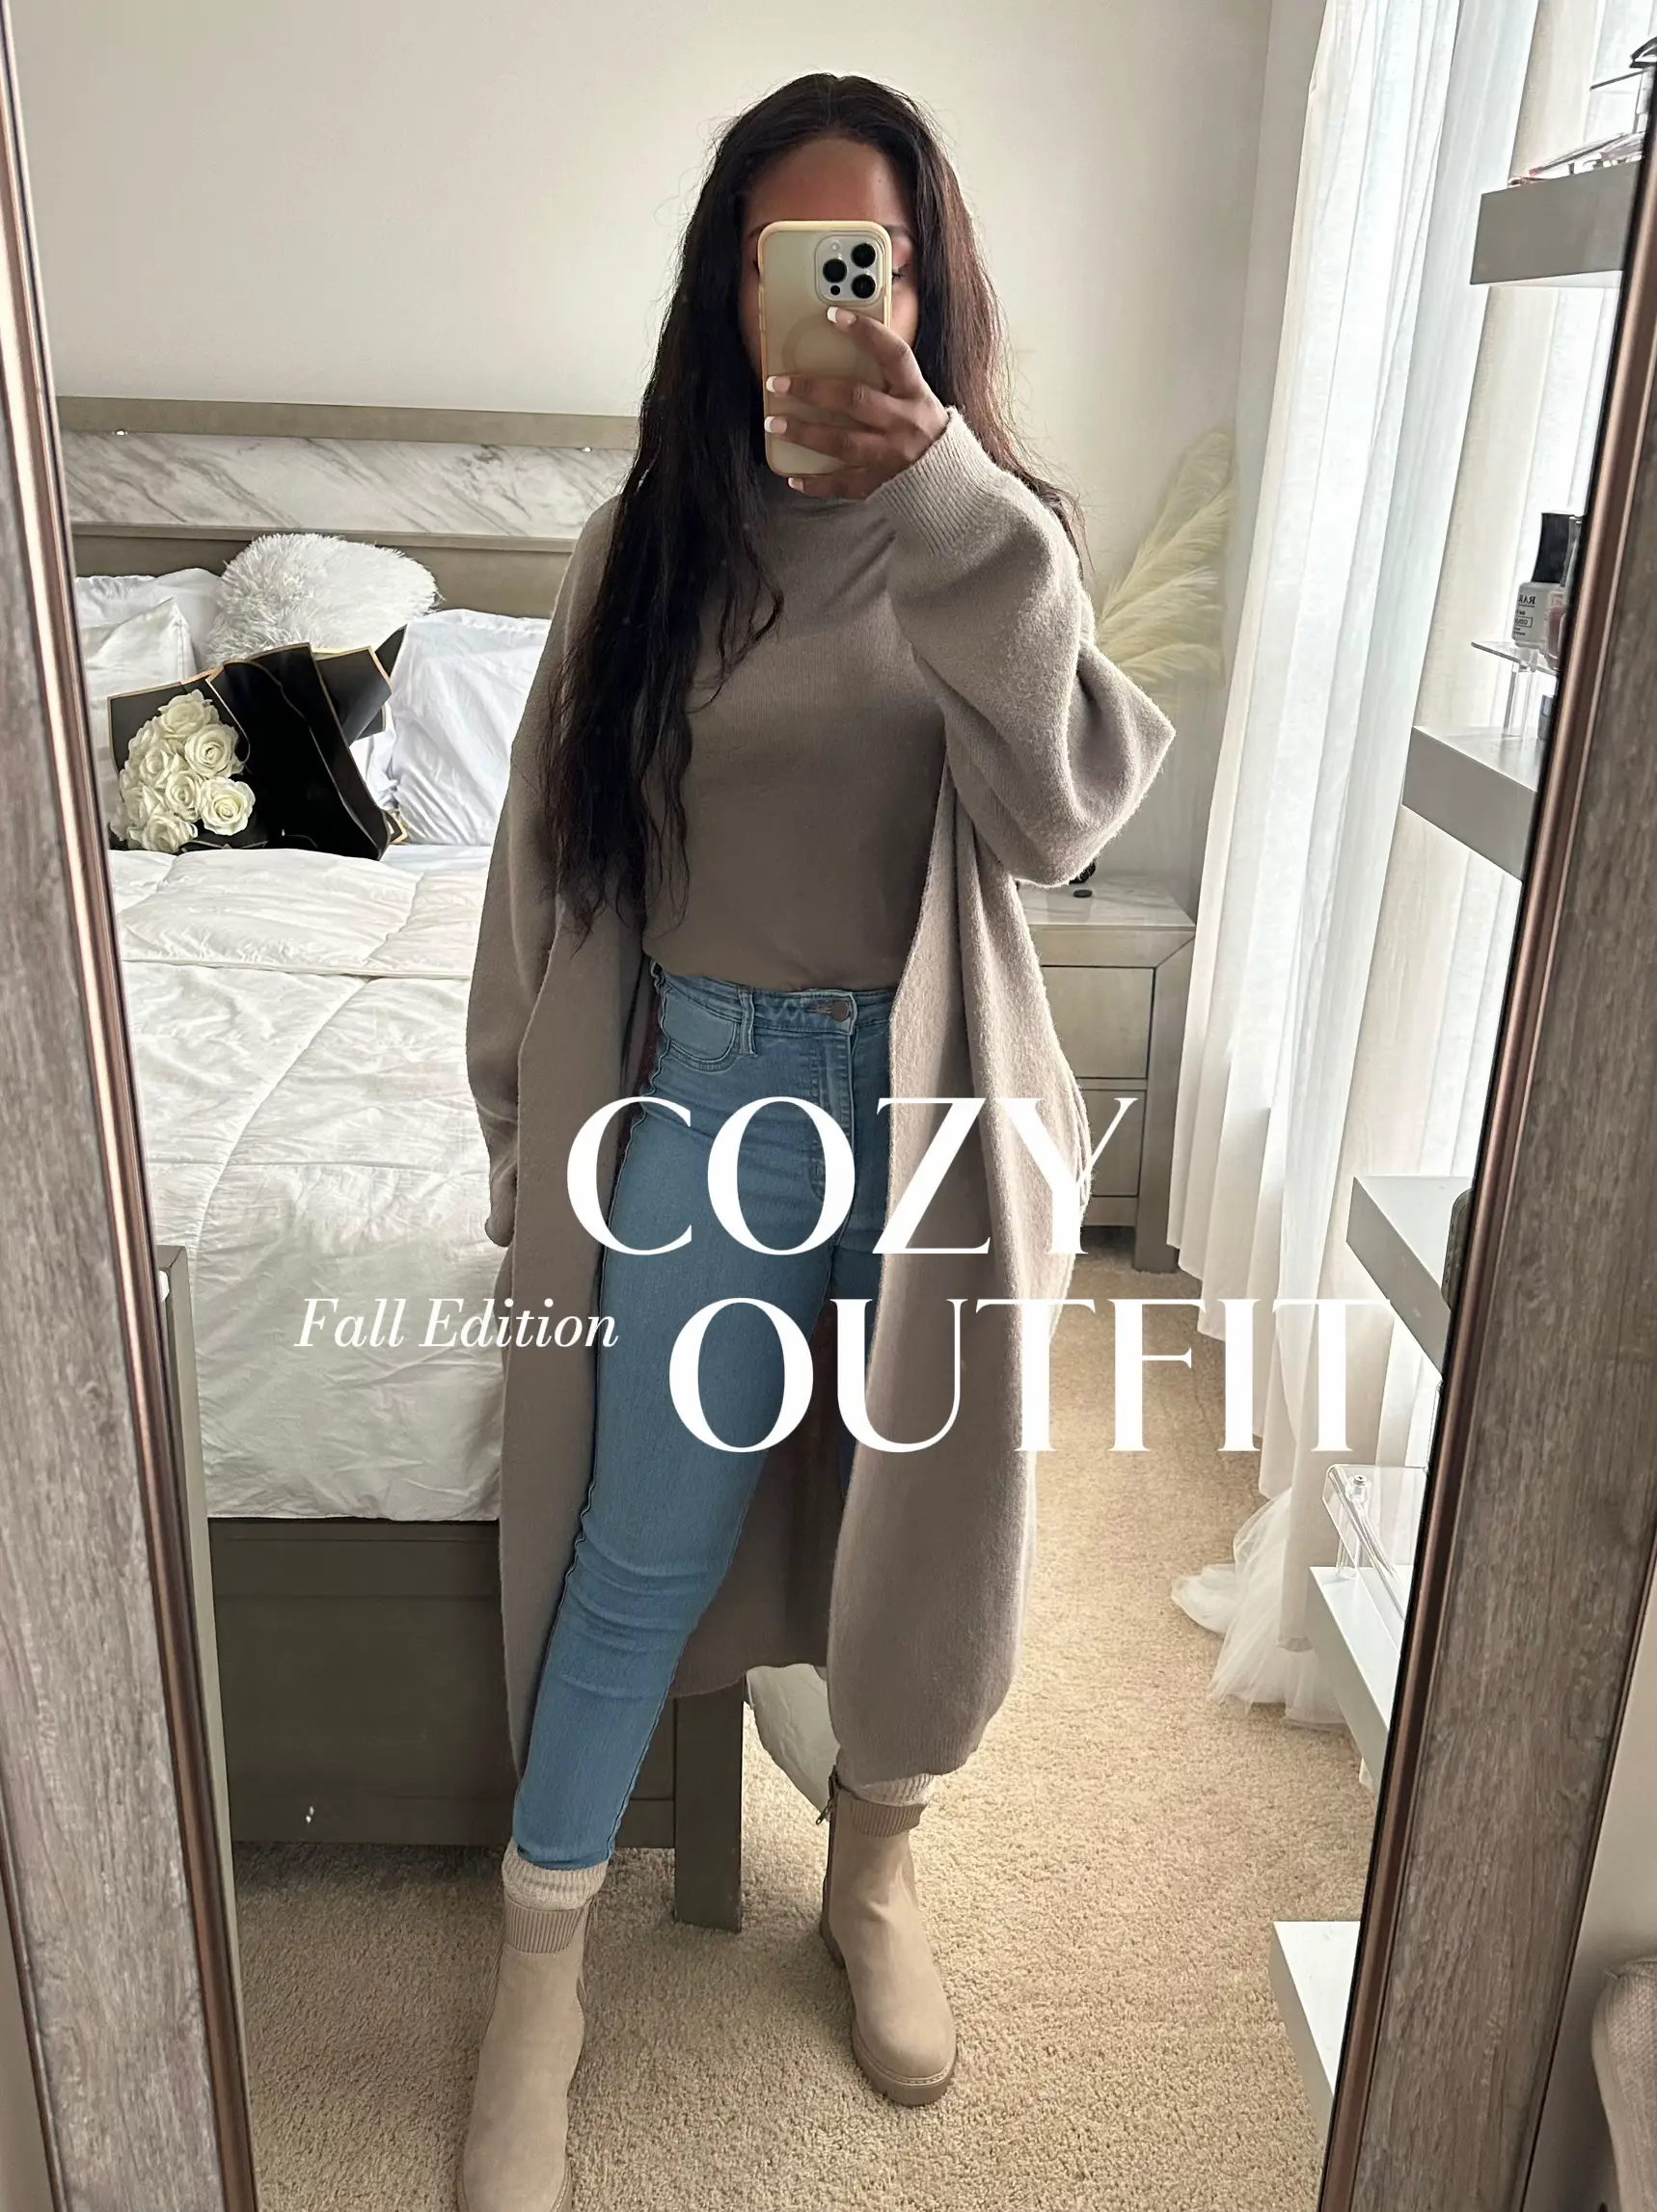 Cozy Outfit Inspo ❄️, Gallery posted by dayswithdeni